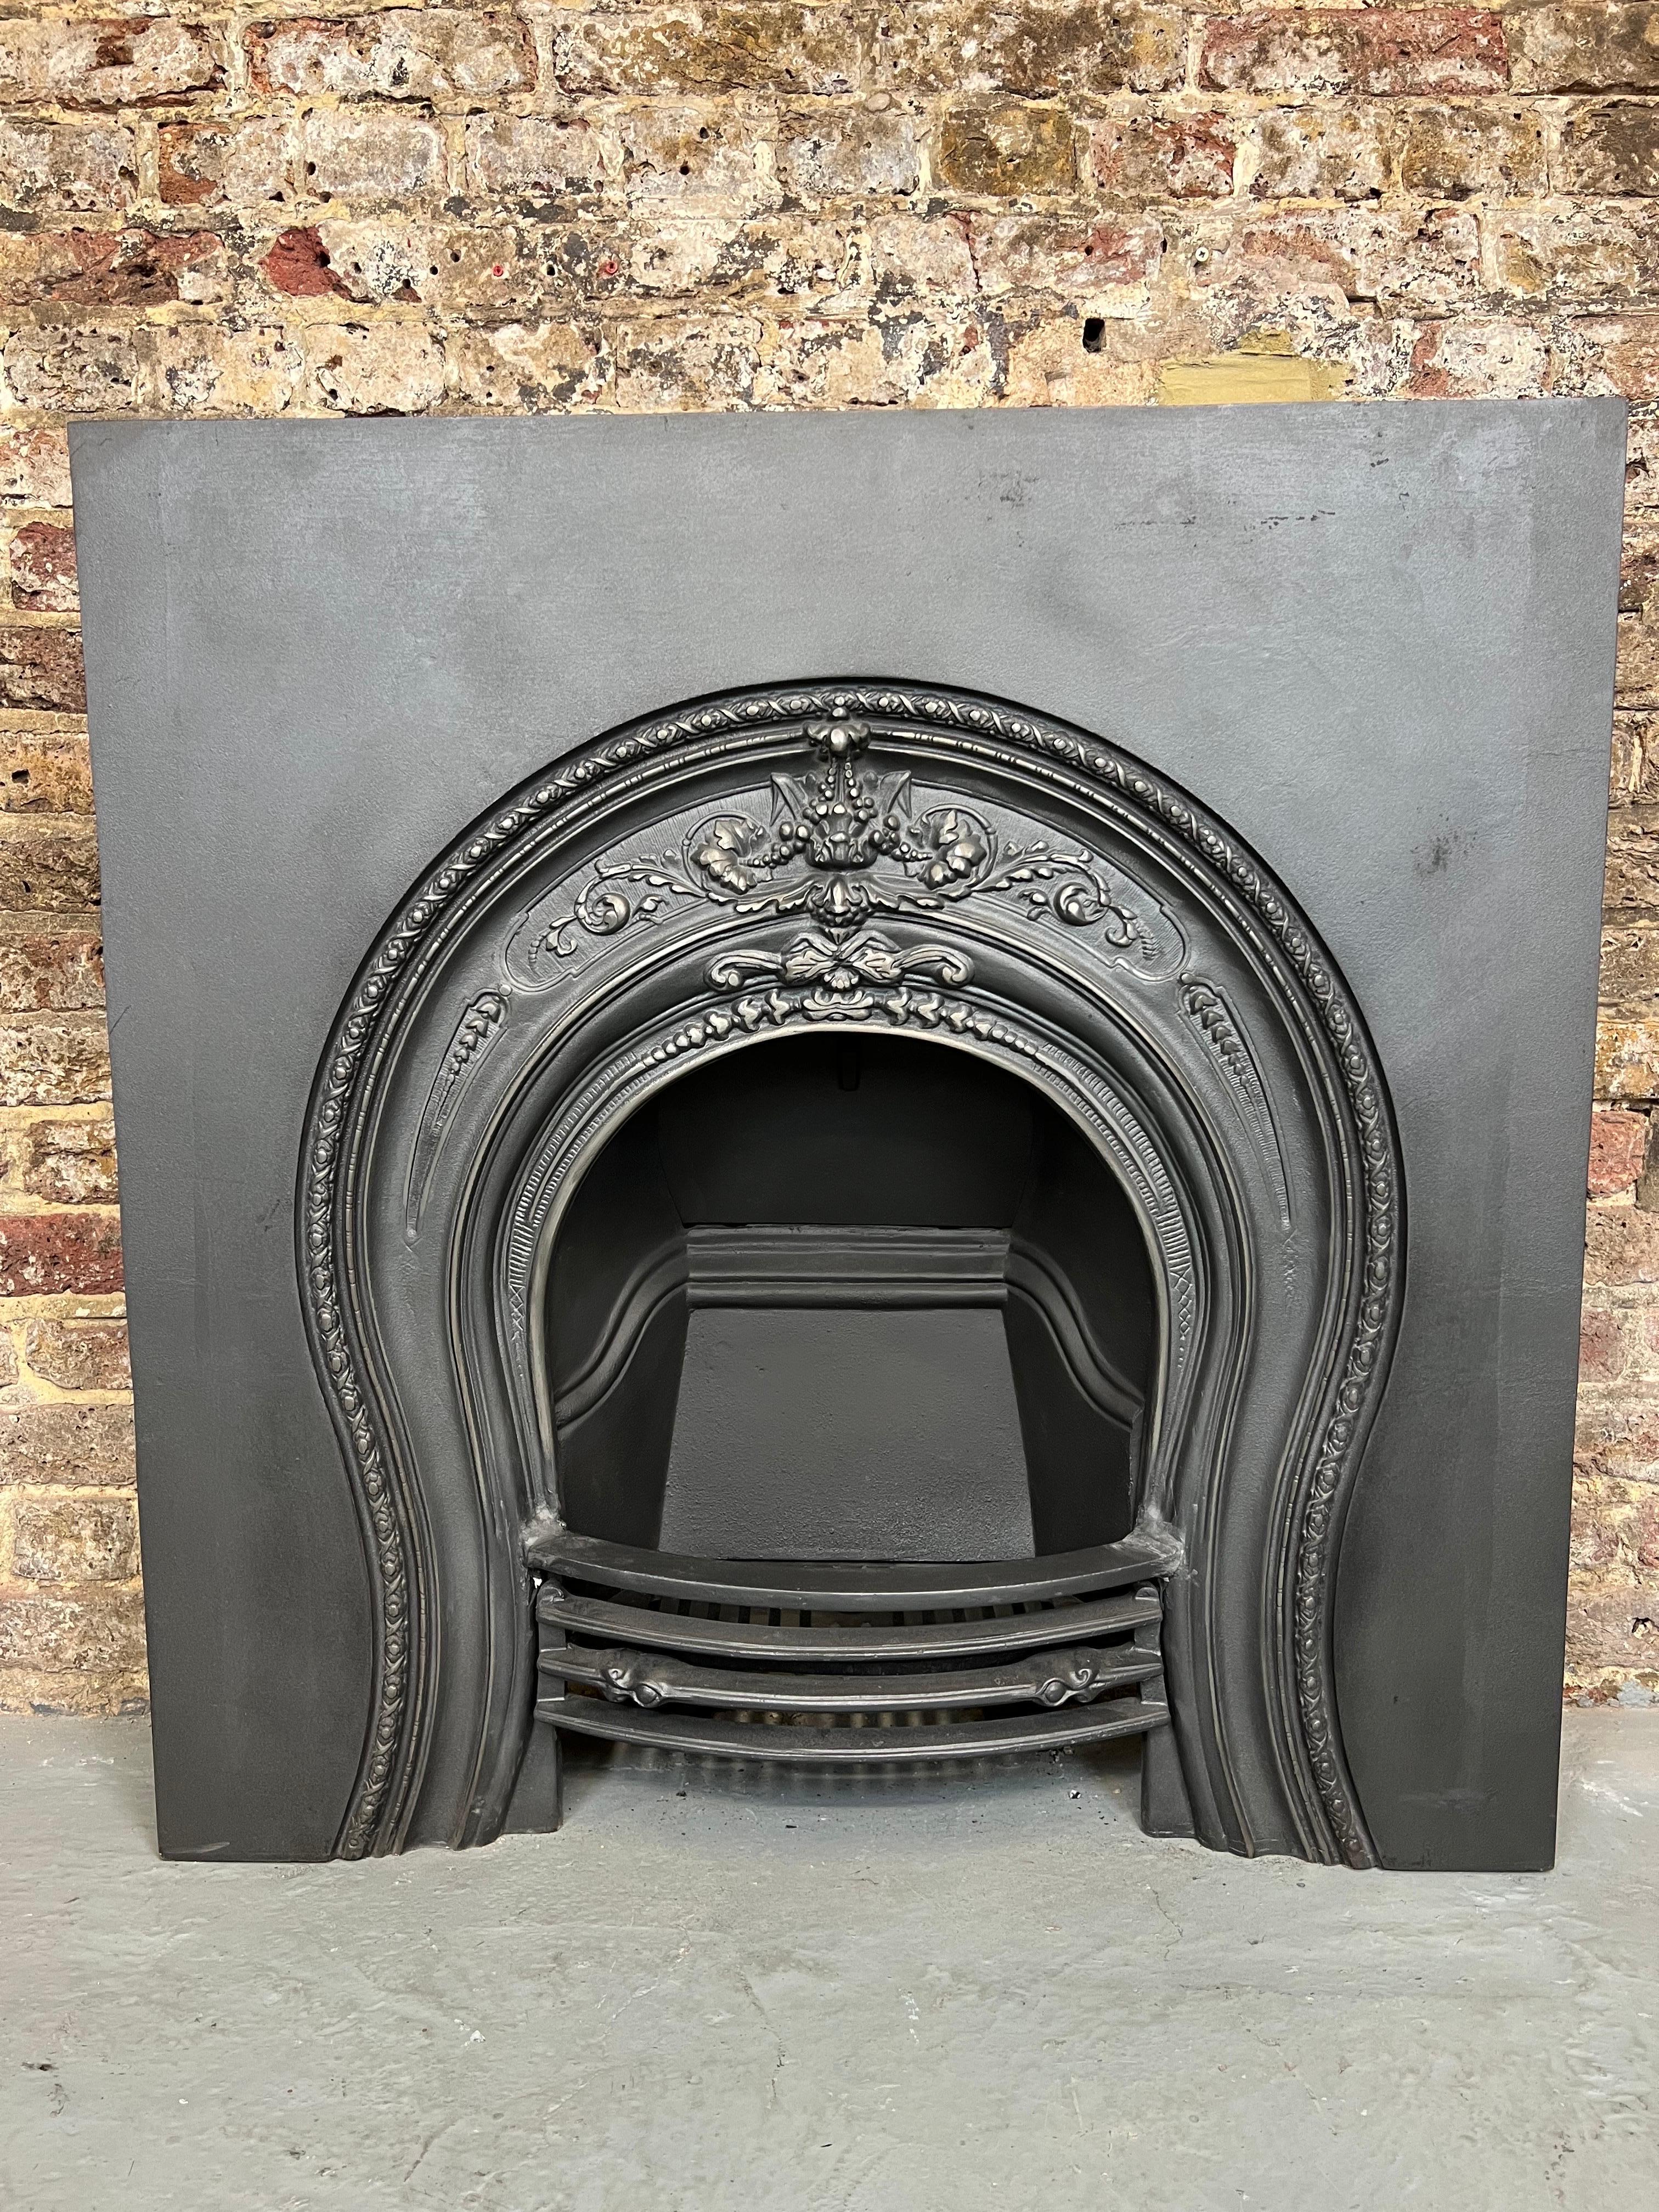 19th Century Cast Iron Fireplace Insert
English Made Circa 1880 From The Victorian Period.
This Classic Horse Shoe Shaped Arched Fireplace Insert Is Complete With Back & Front Bars.
In Traditional Blackened Finish. Recently Salvaged From A Period